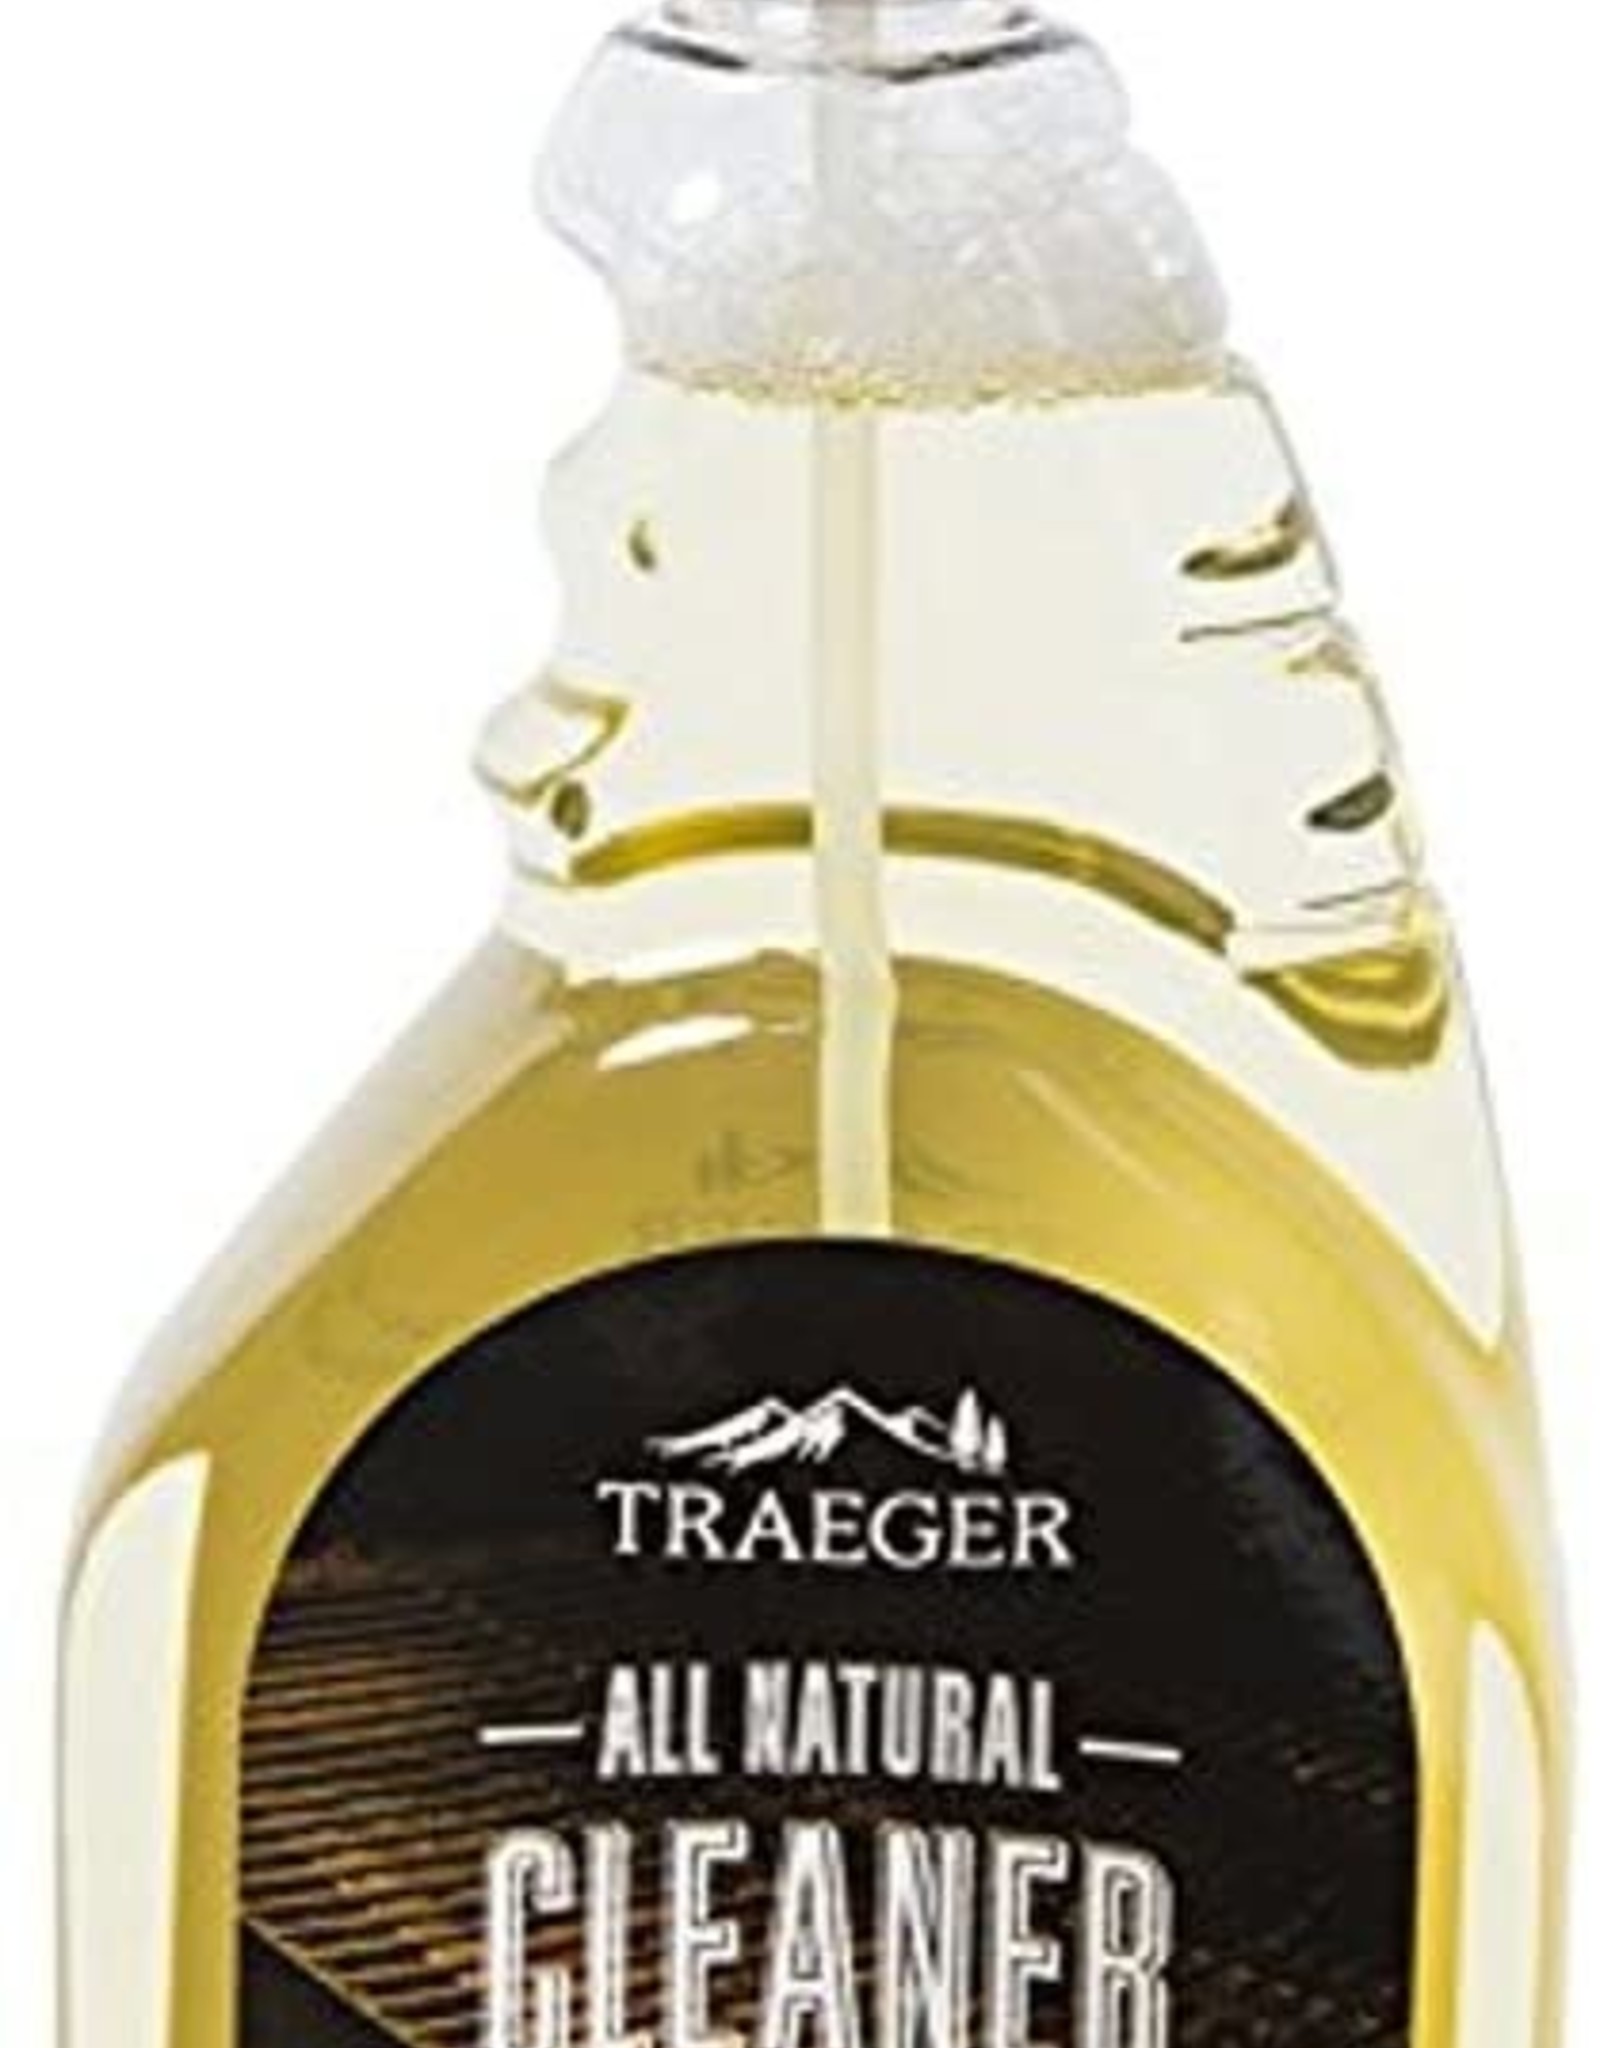 Shop the Traeger All Natural Grill Cleaner - BAC403